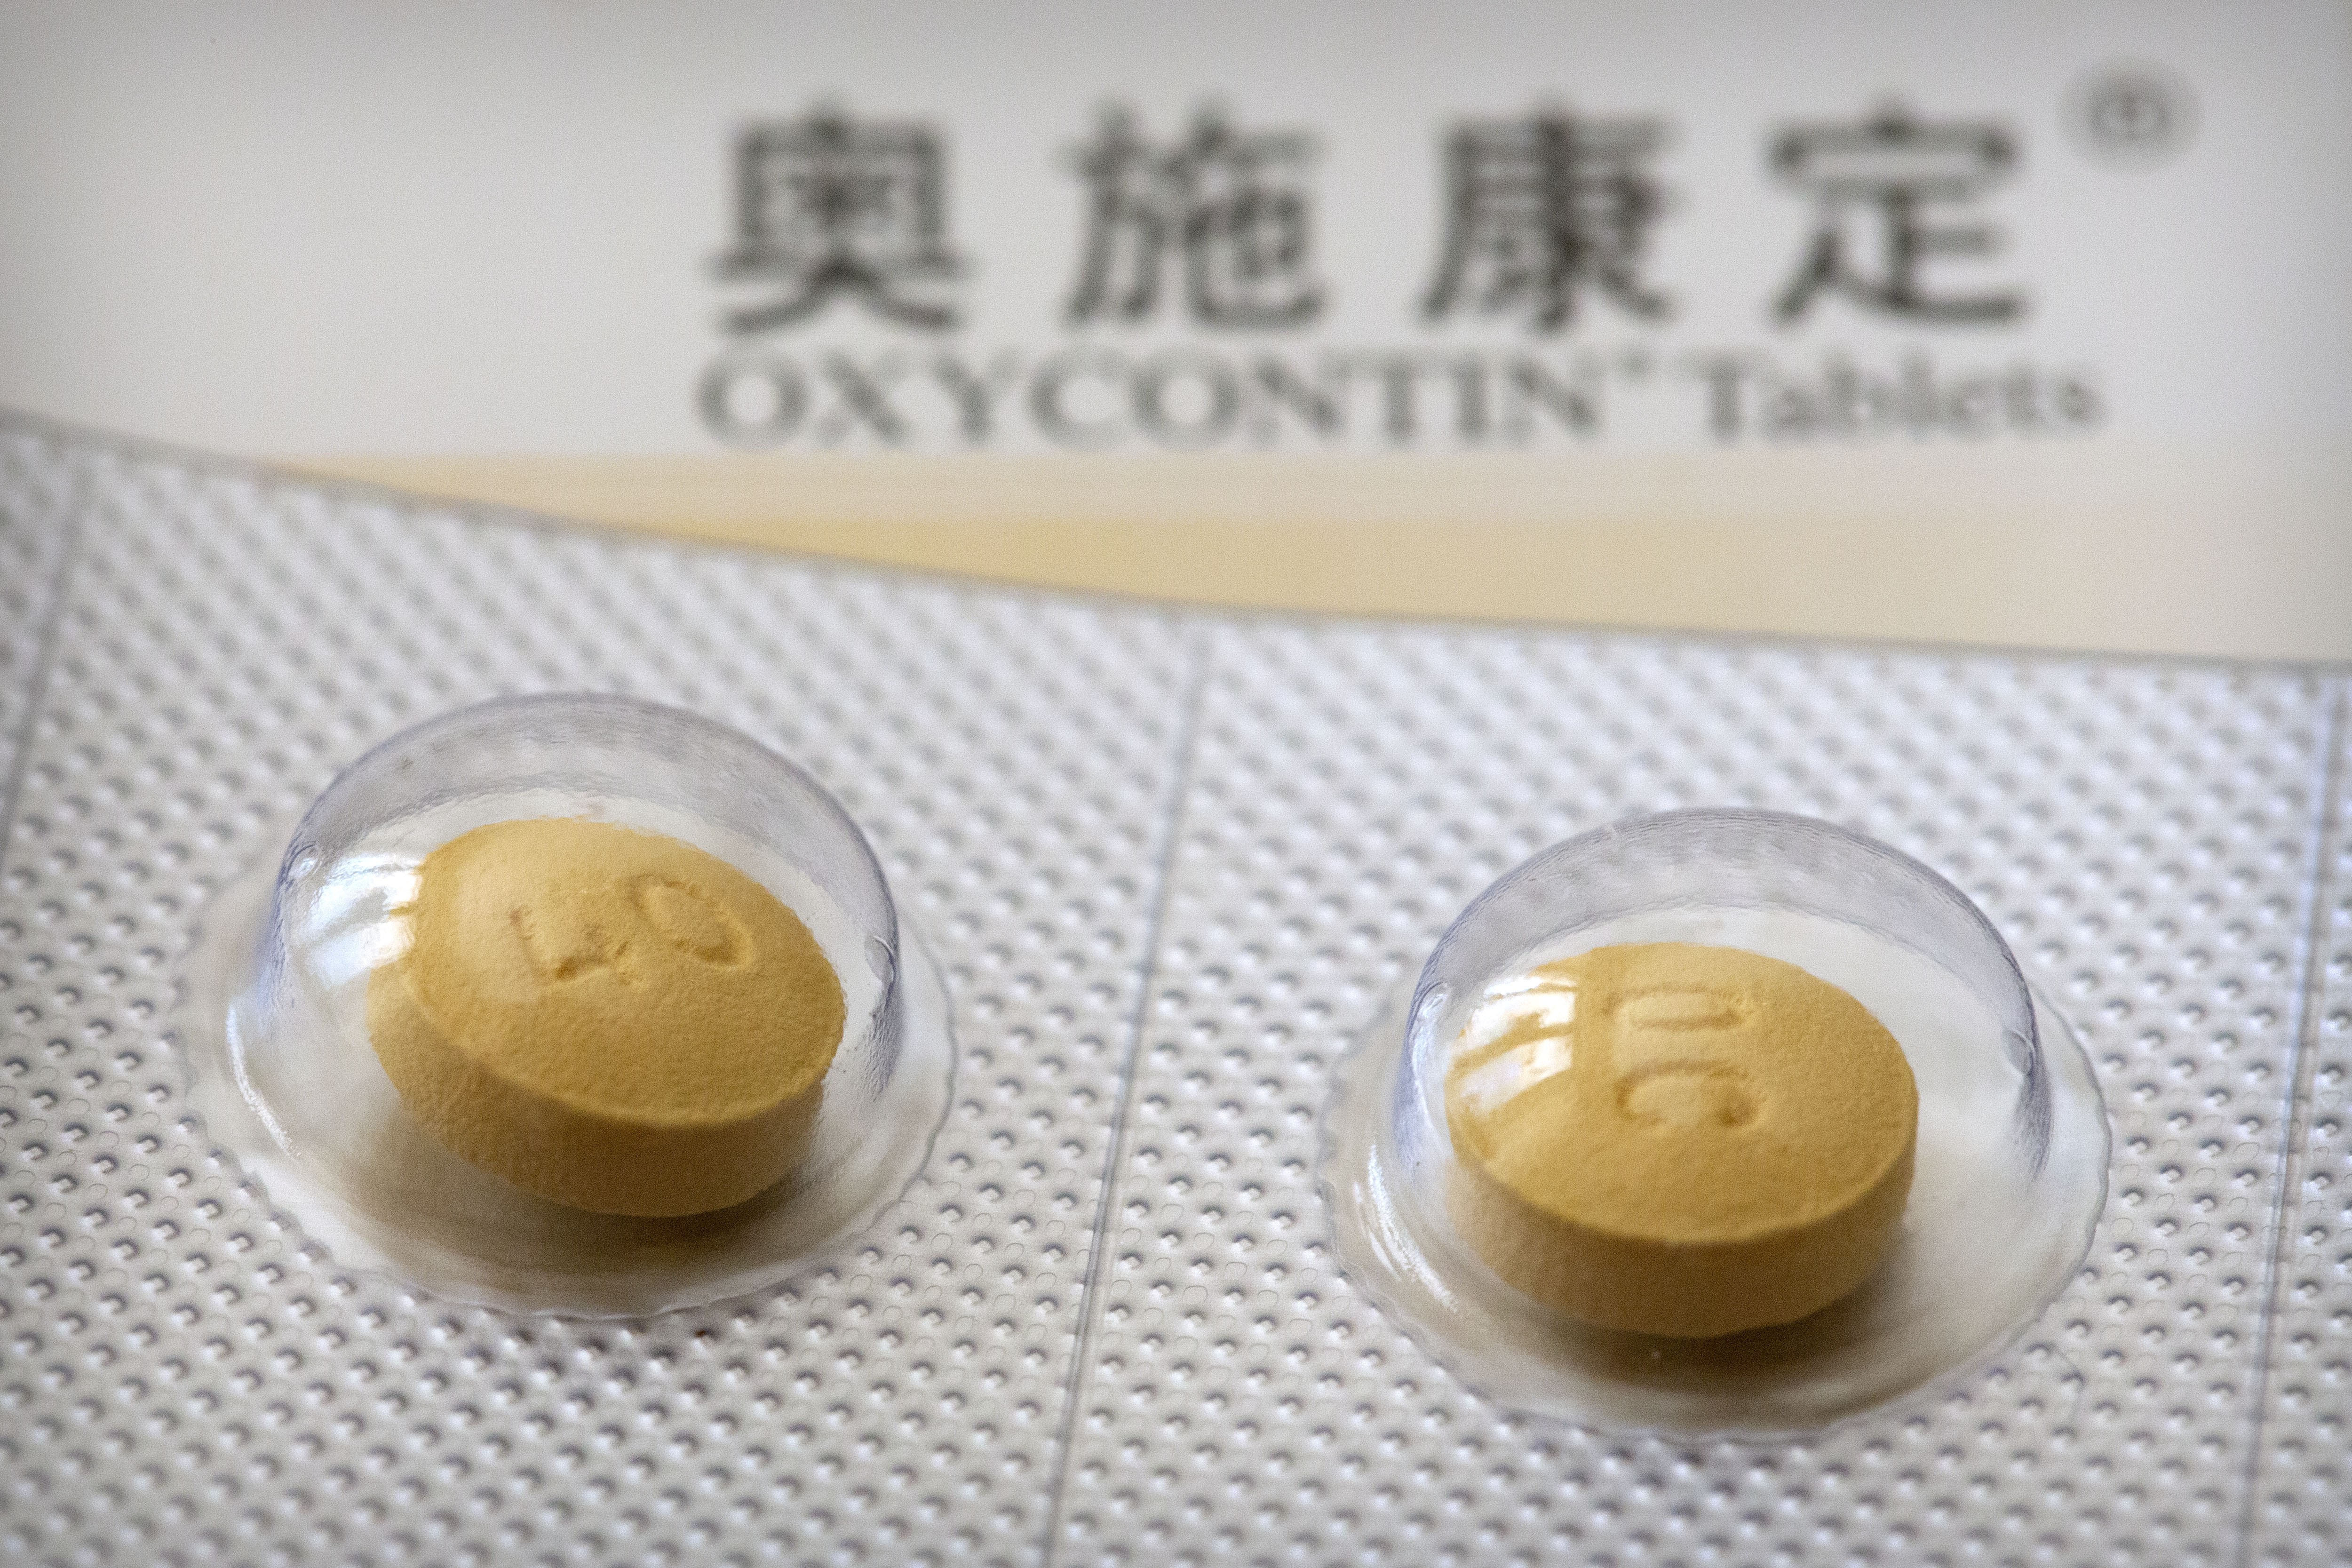 Abusers of medical drugs in China are getting access to supplies from vendors who use e-commerce sites. Photo: AP